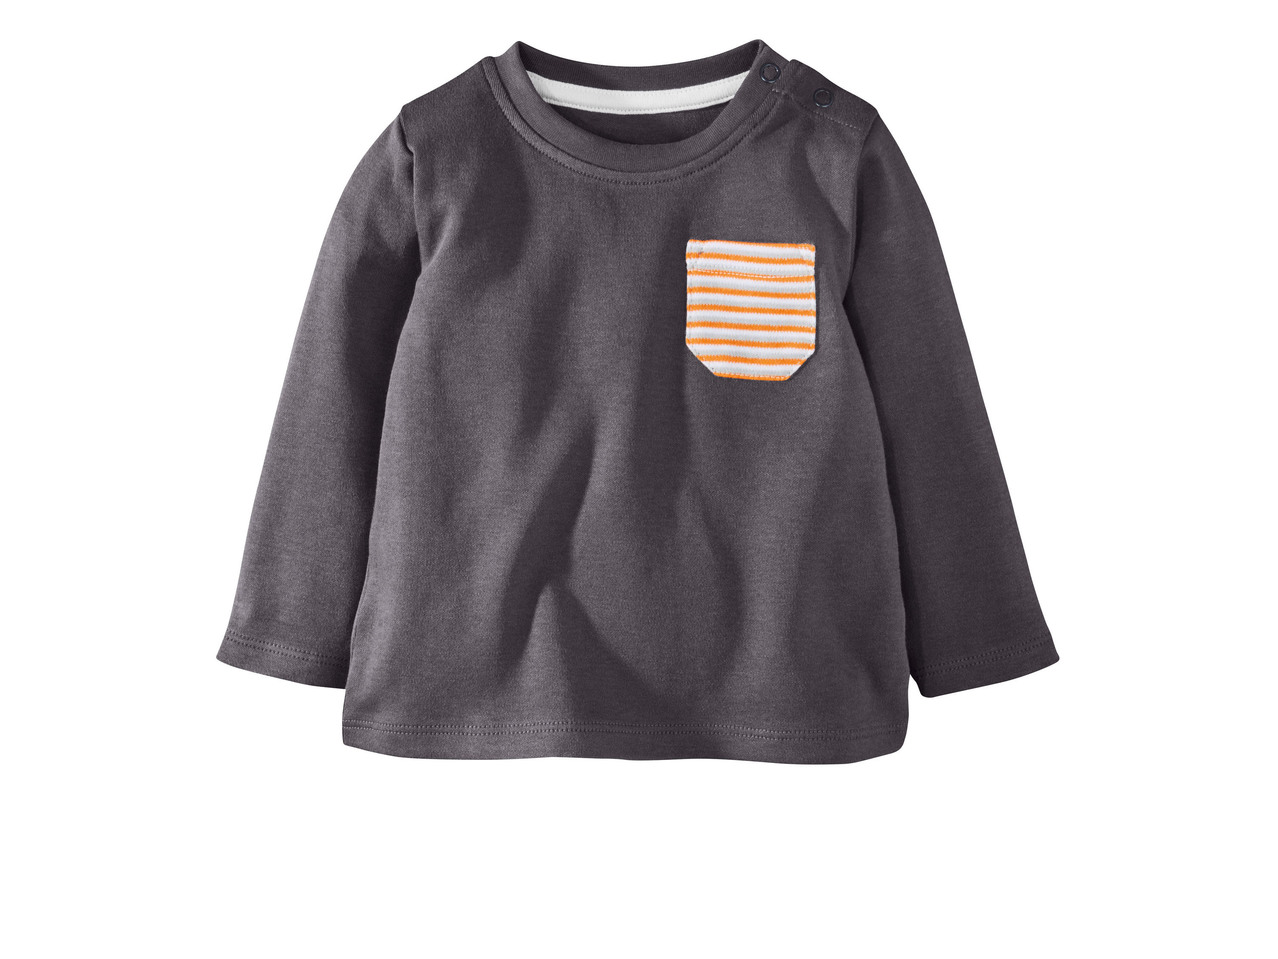 Baby Boys' Long-Sleeved Top, 3 pieces